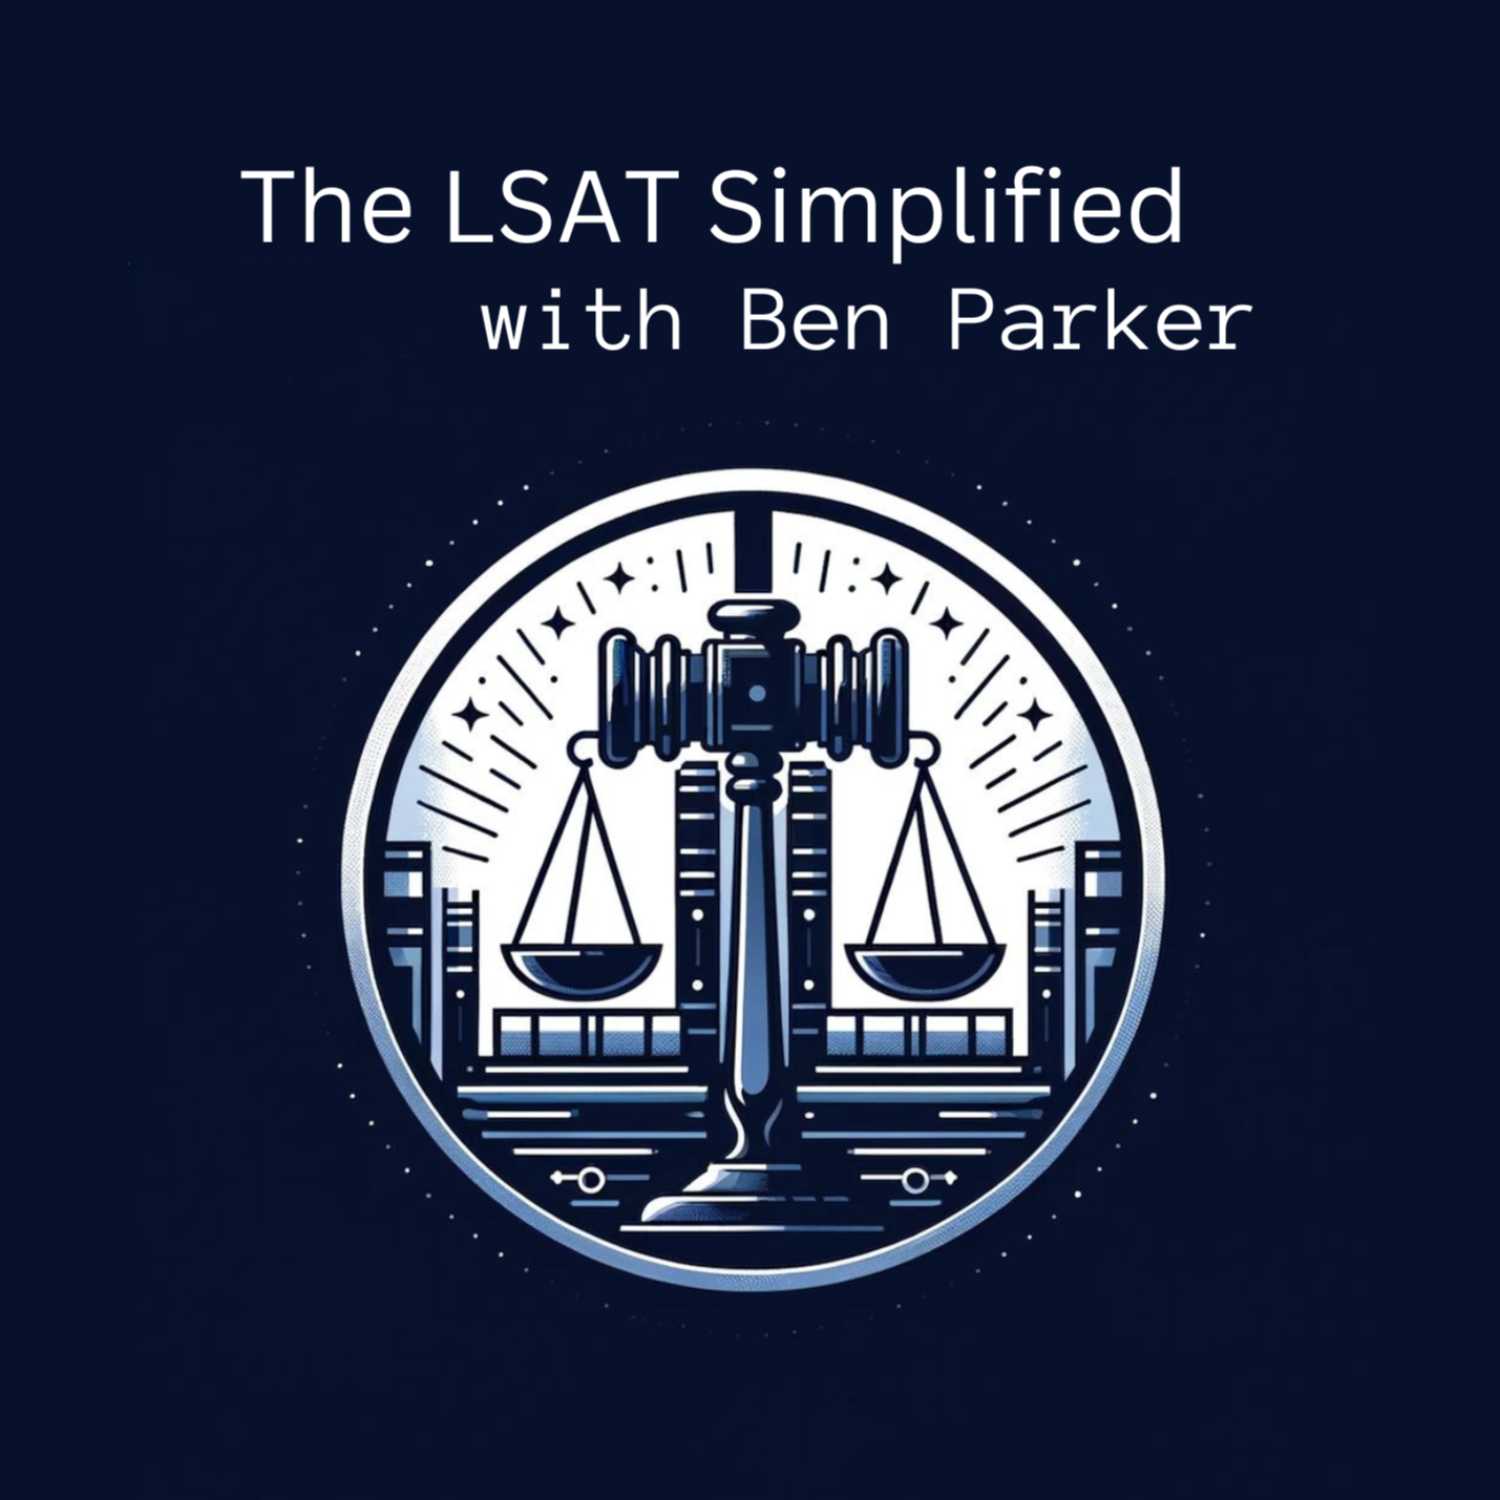 The LSAT Simplified